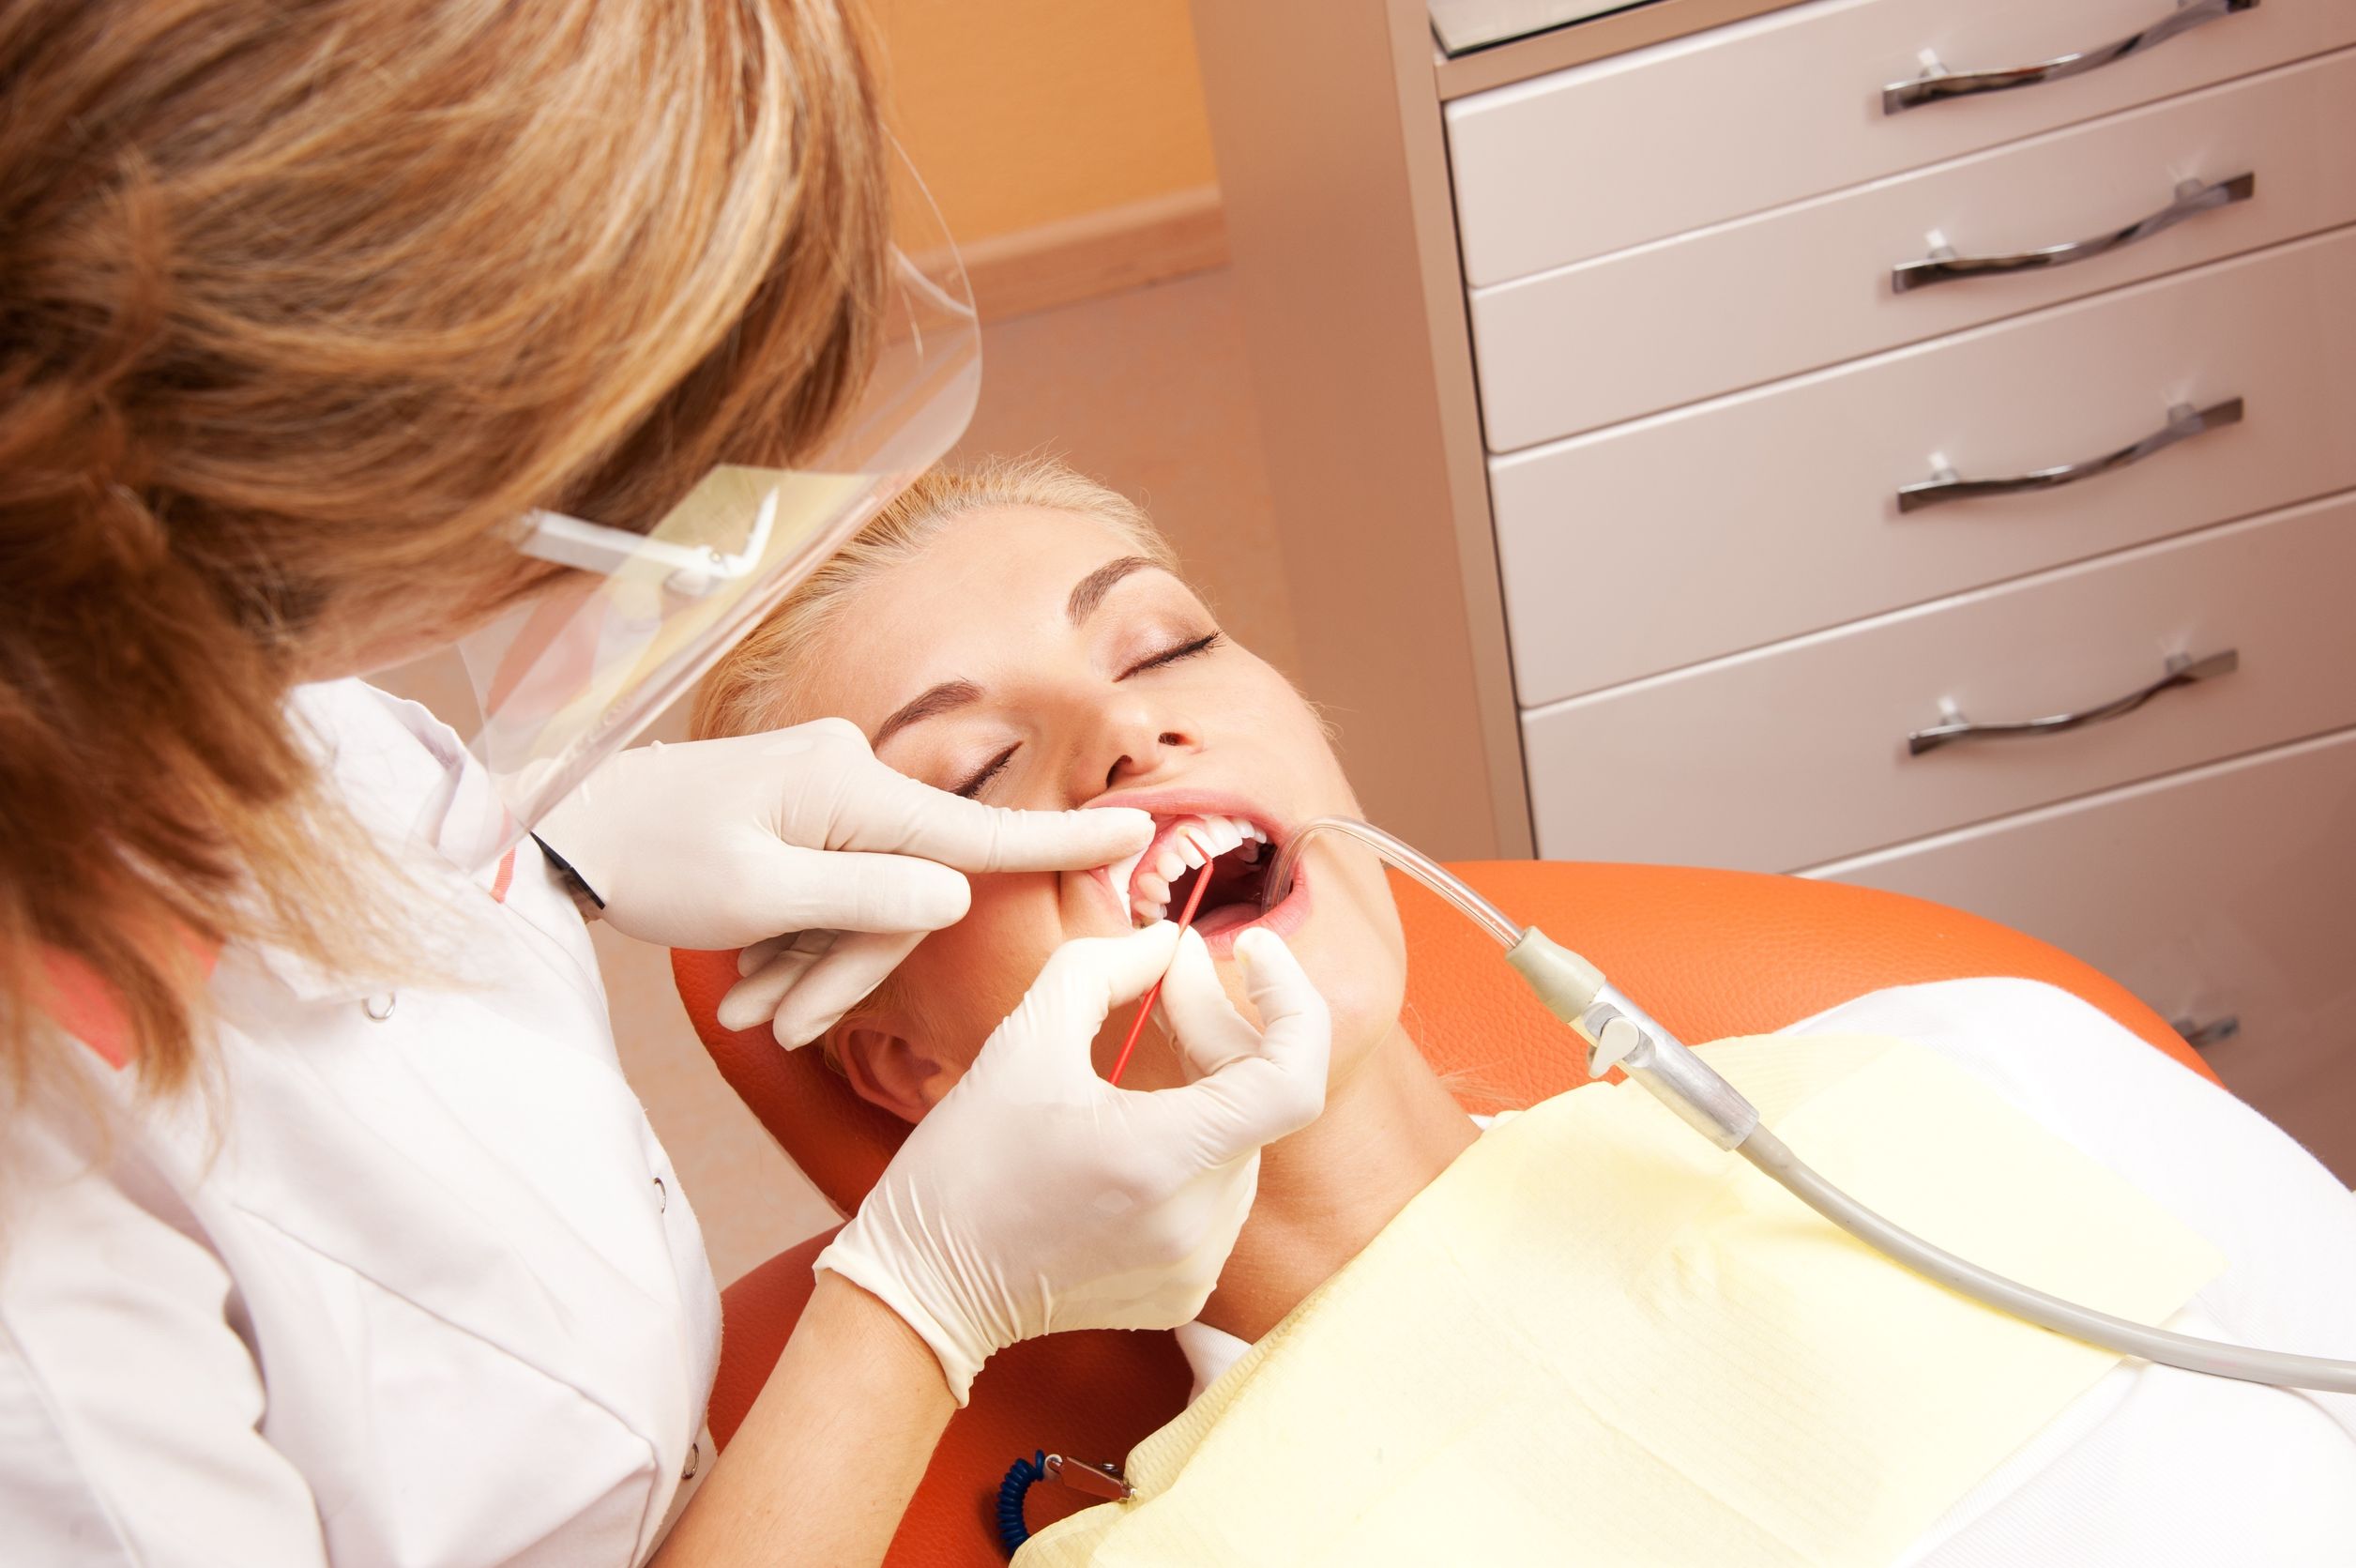 Find Expert Dentistry in Macon, GA, to Enjoy Great Oral Health